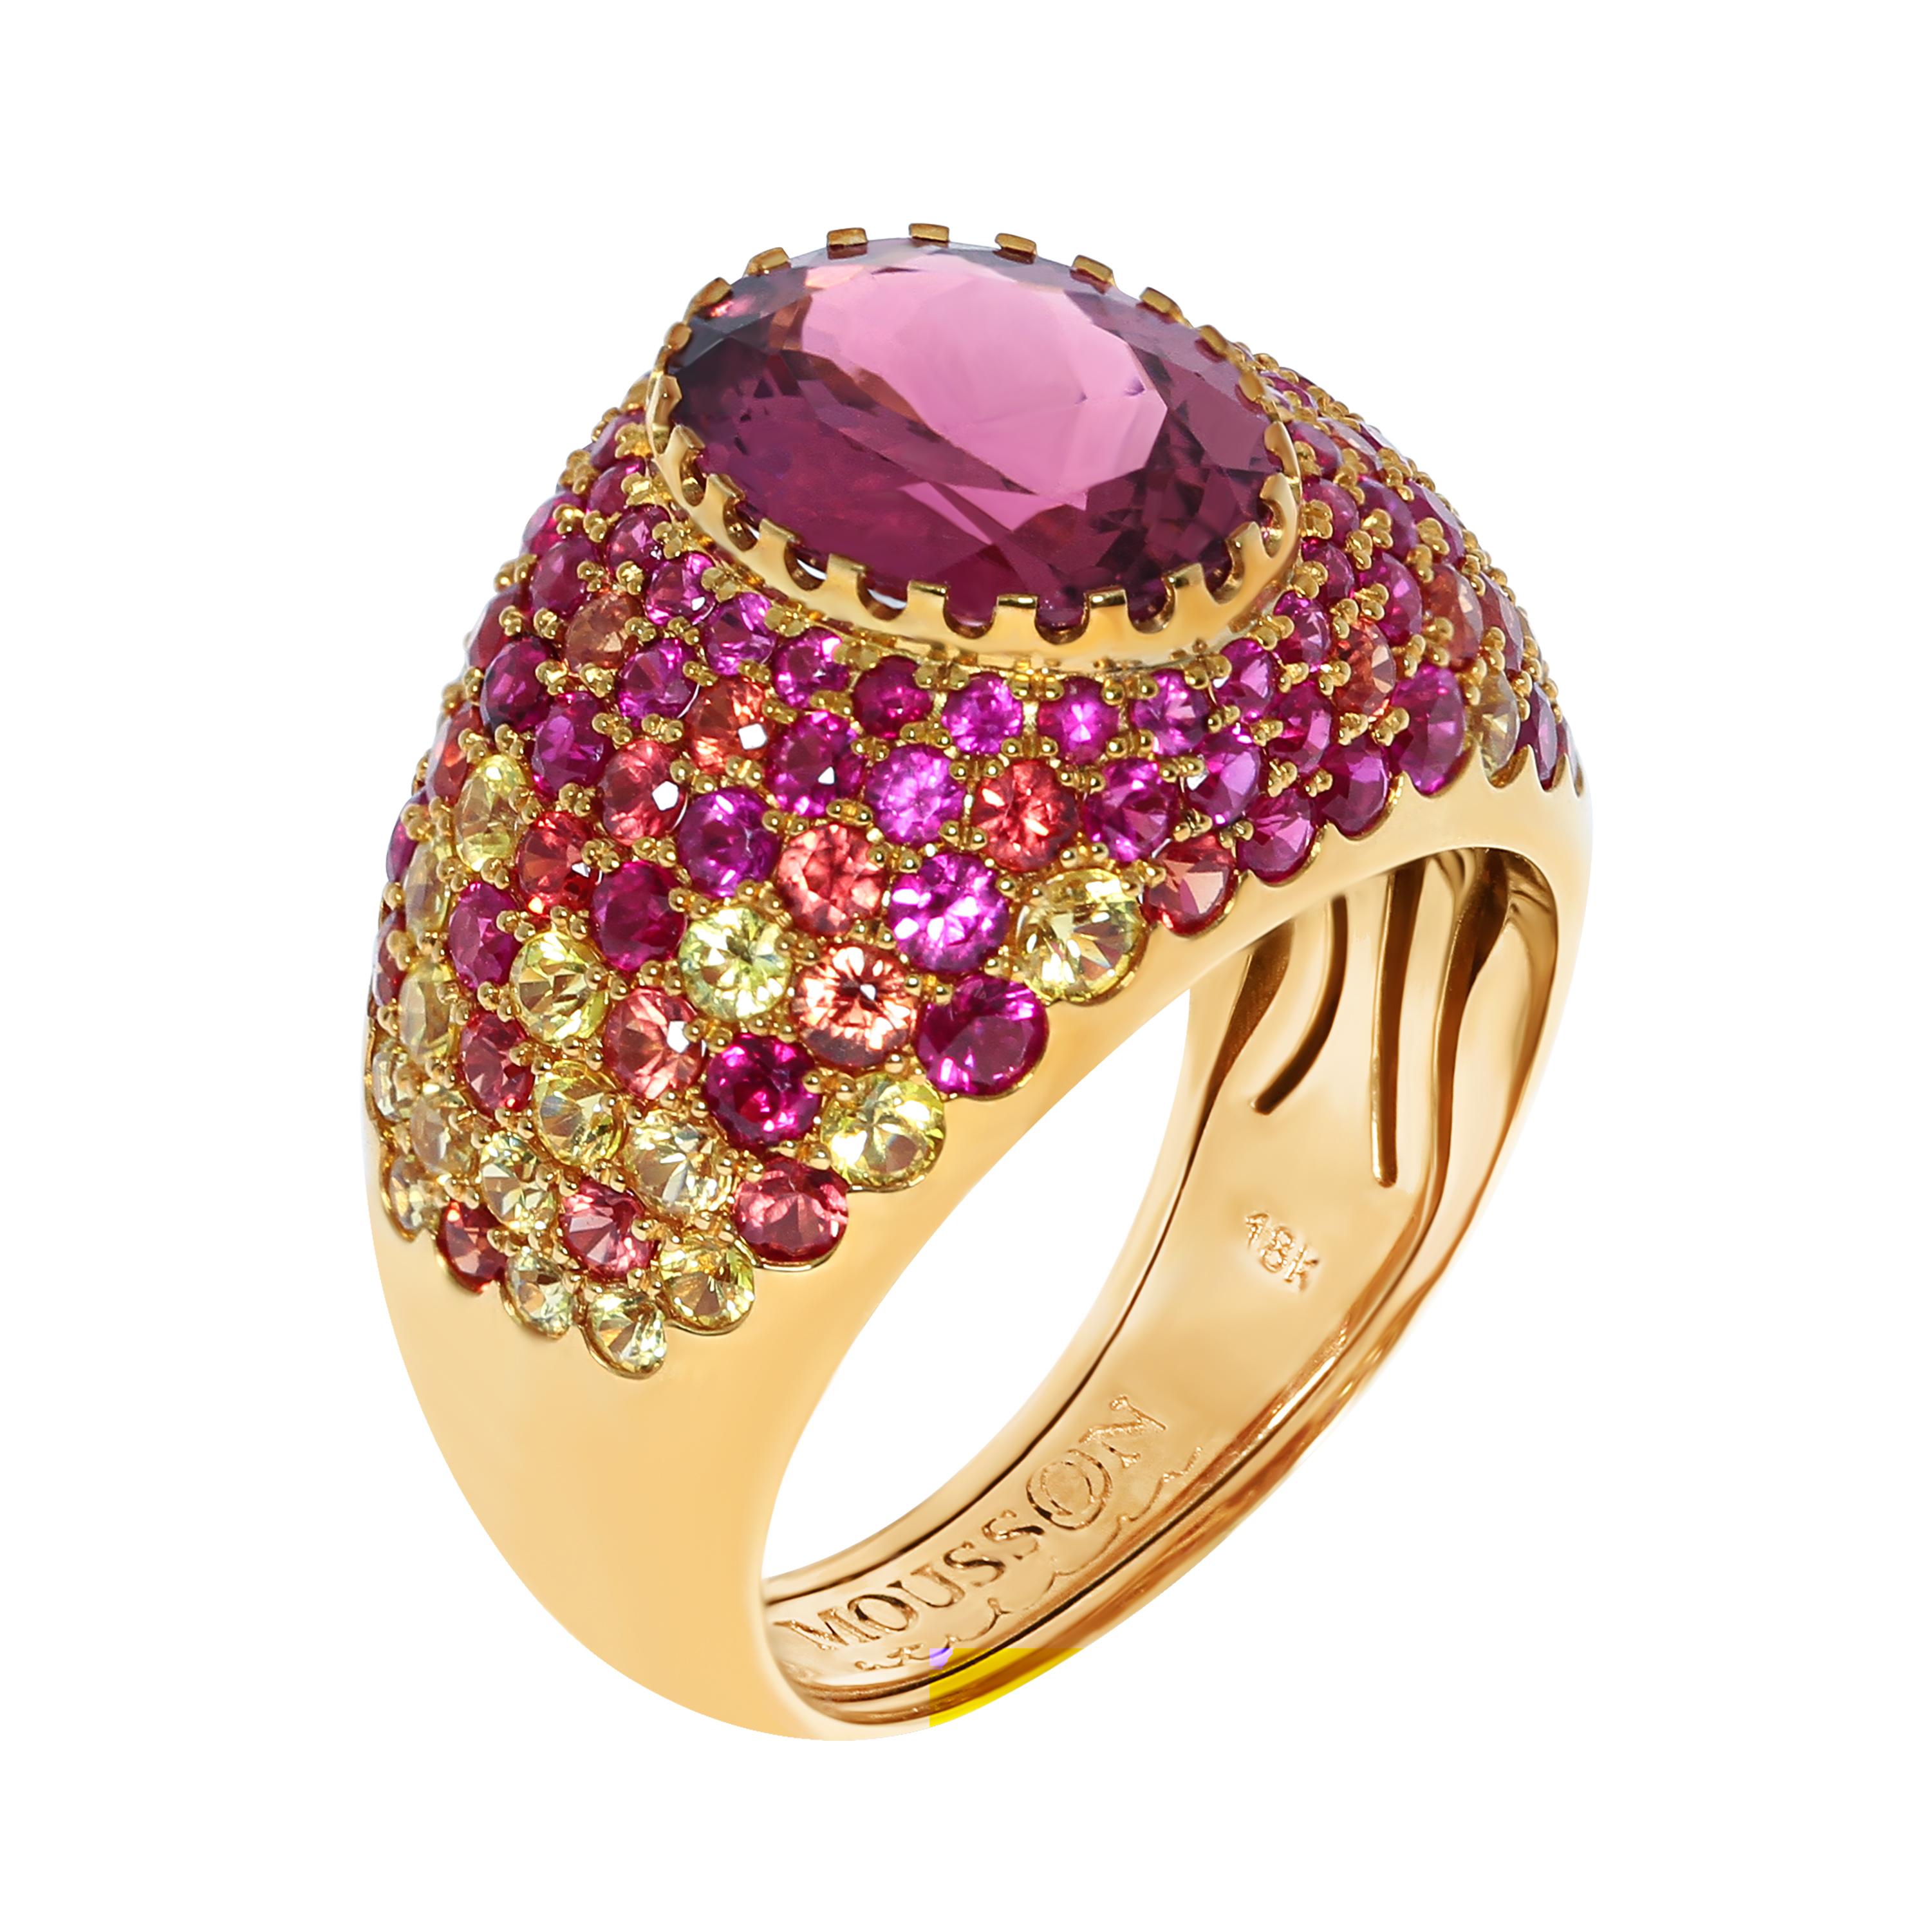 Oval Cut Pink Tourmalines Sapphires Rubies Yellow 18 Karat Gold Riviera Suite For Sale